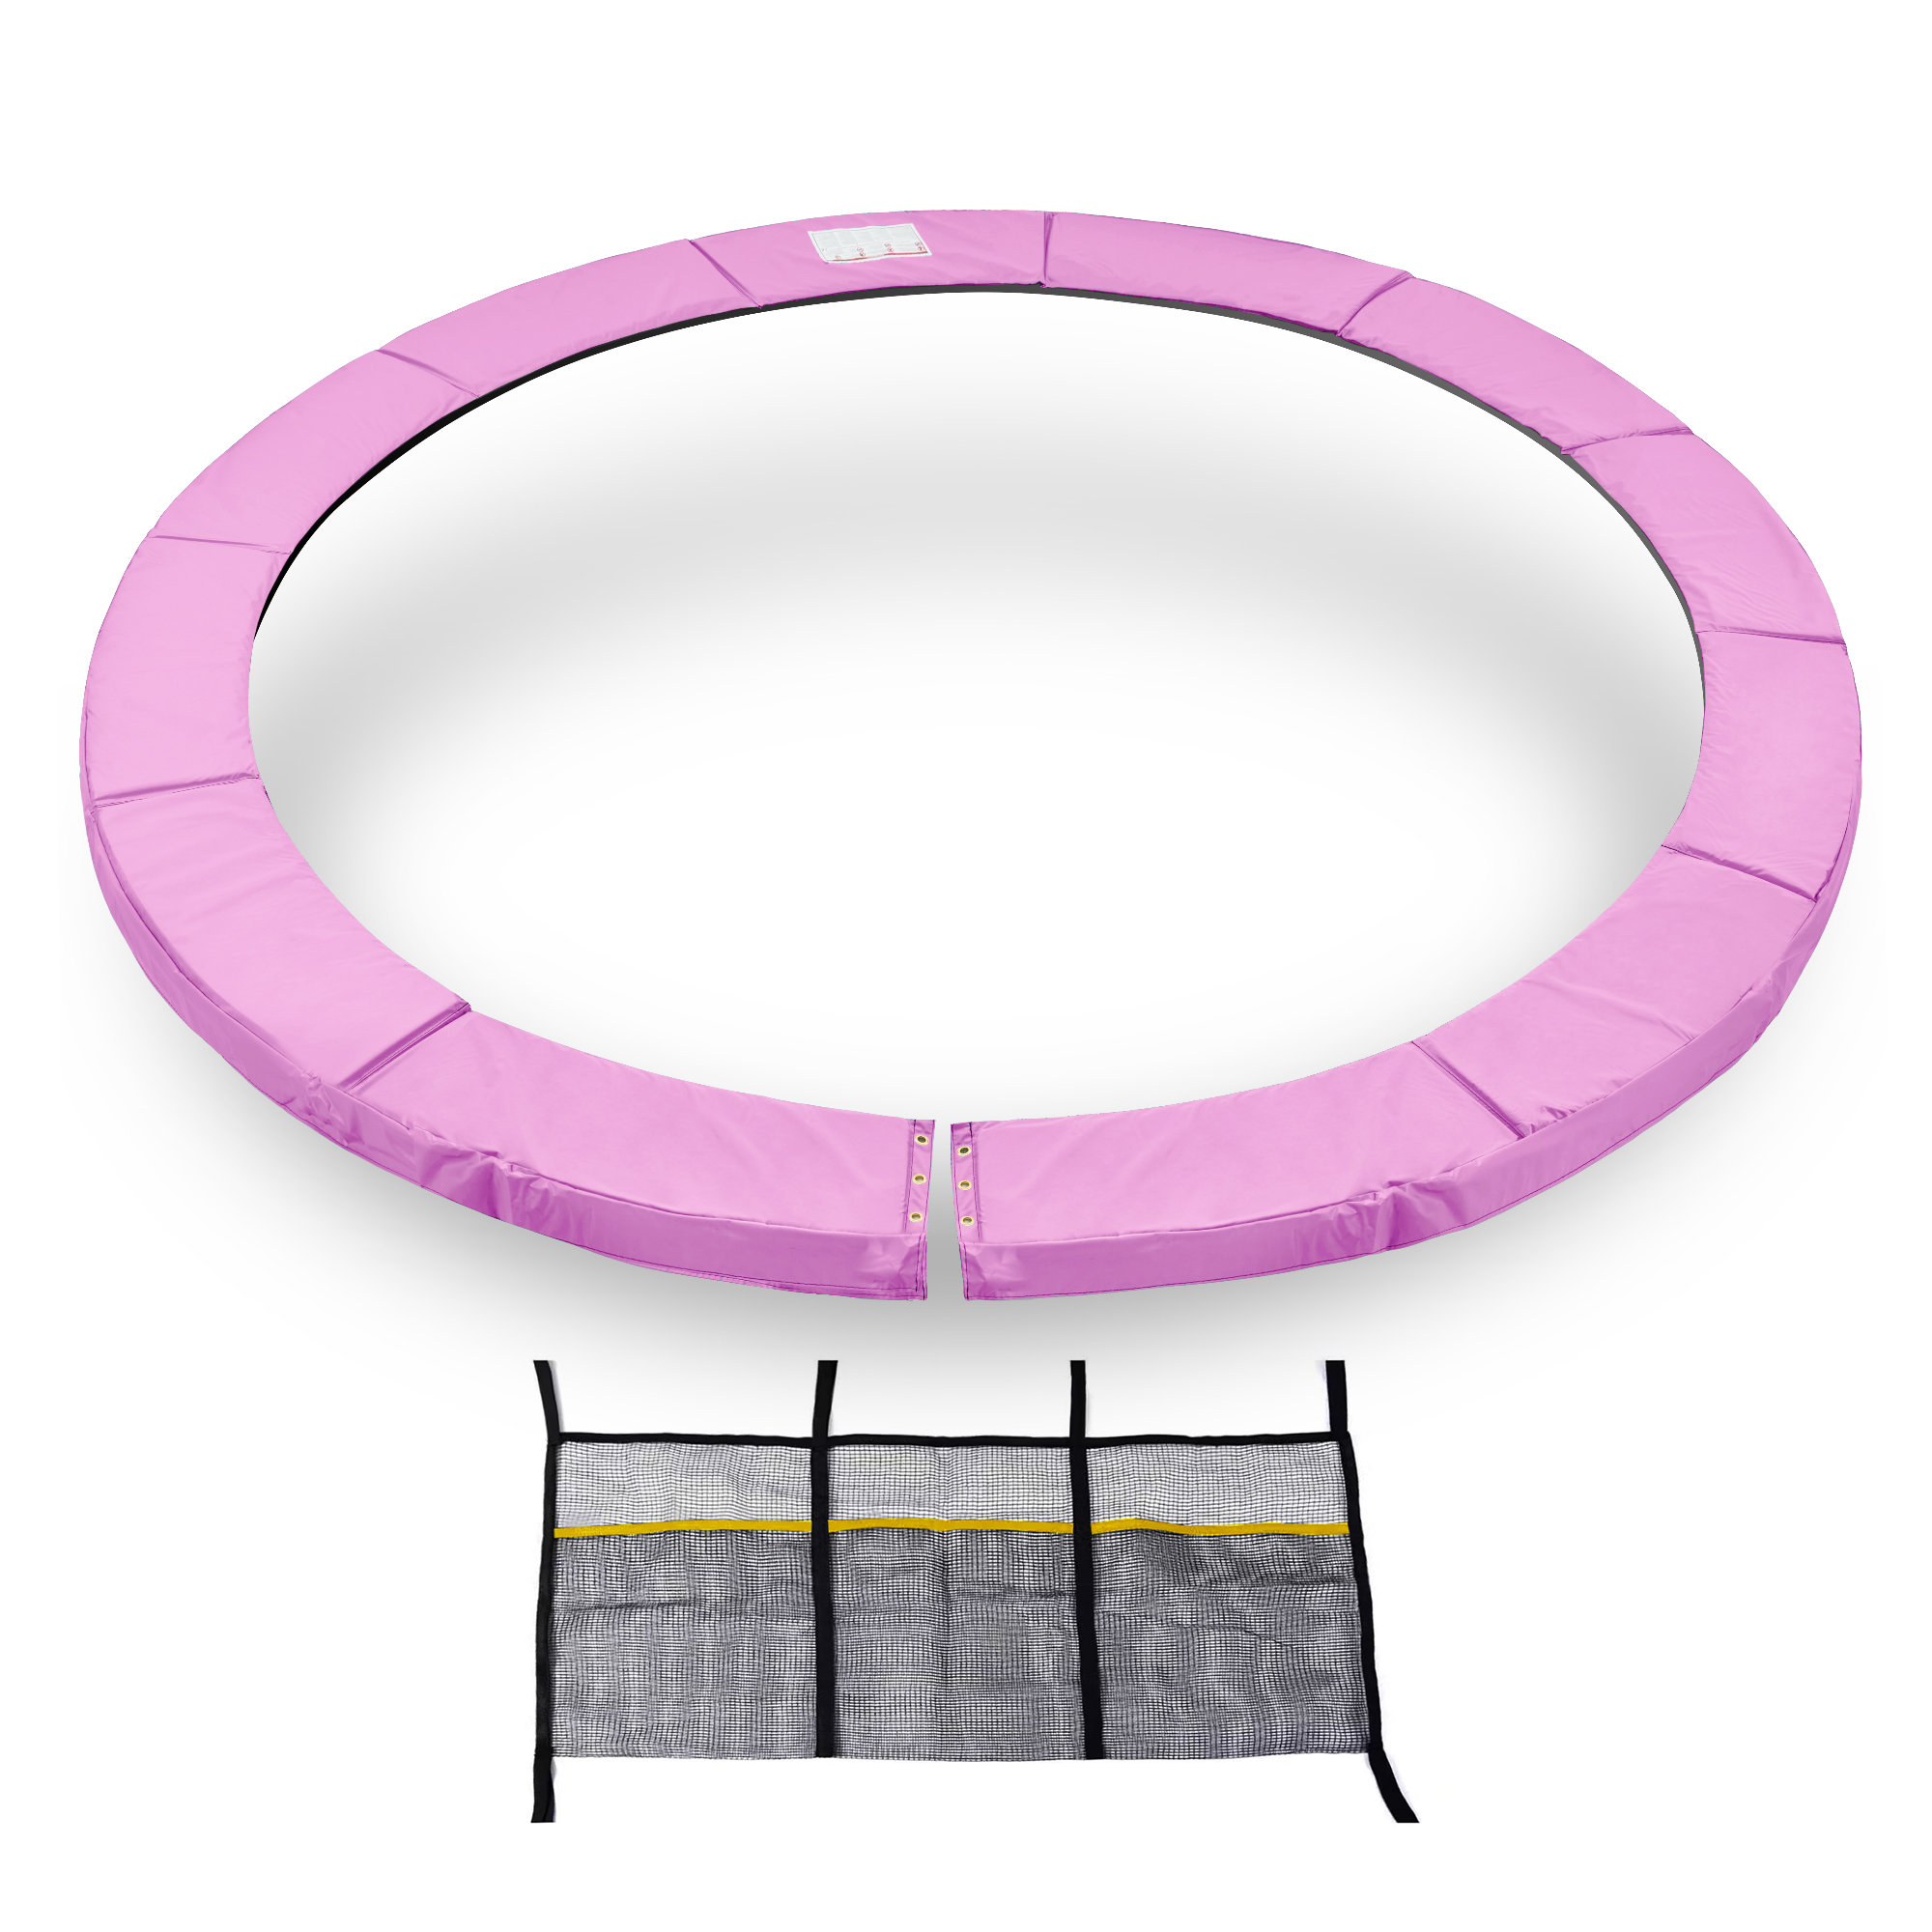 ExacMe Replacement Trampoline Pad, Safety Spring Cover Frame Pad 10 12